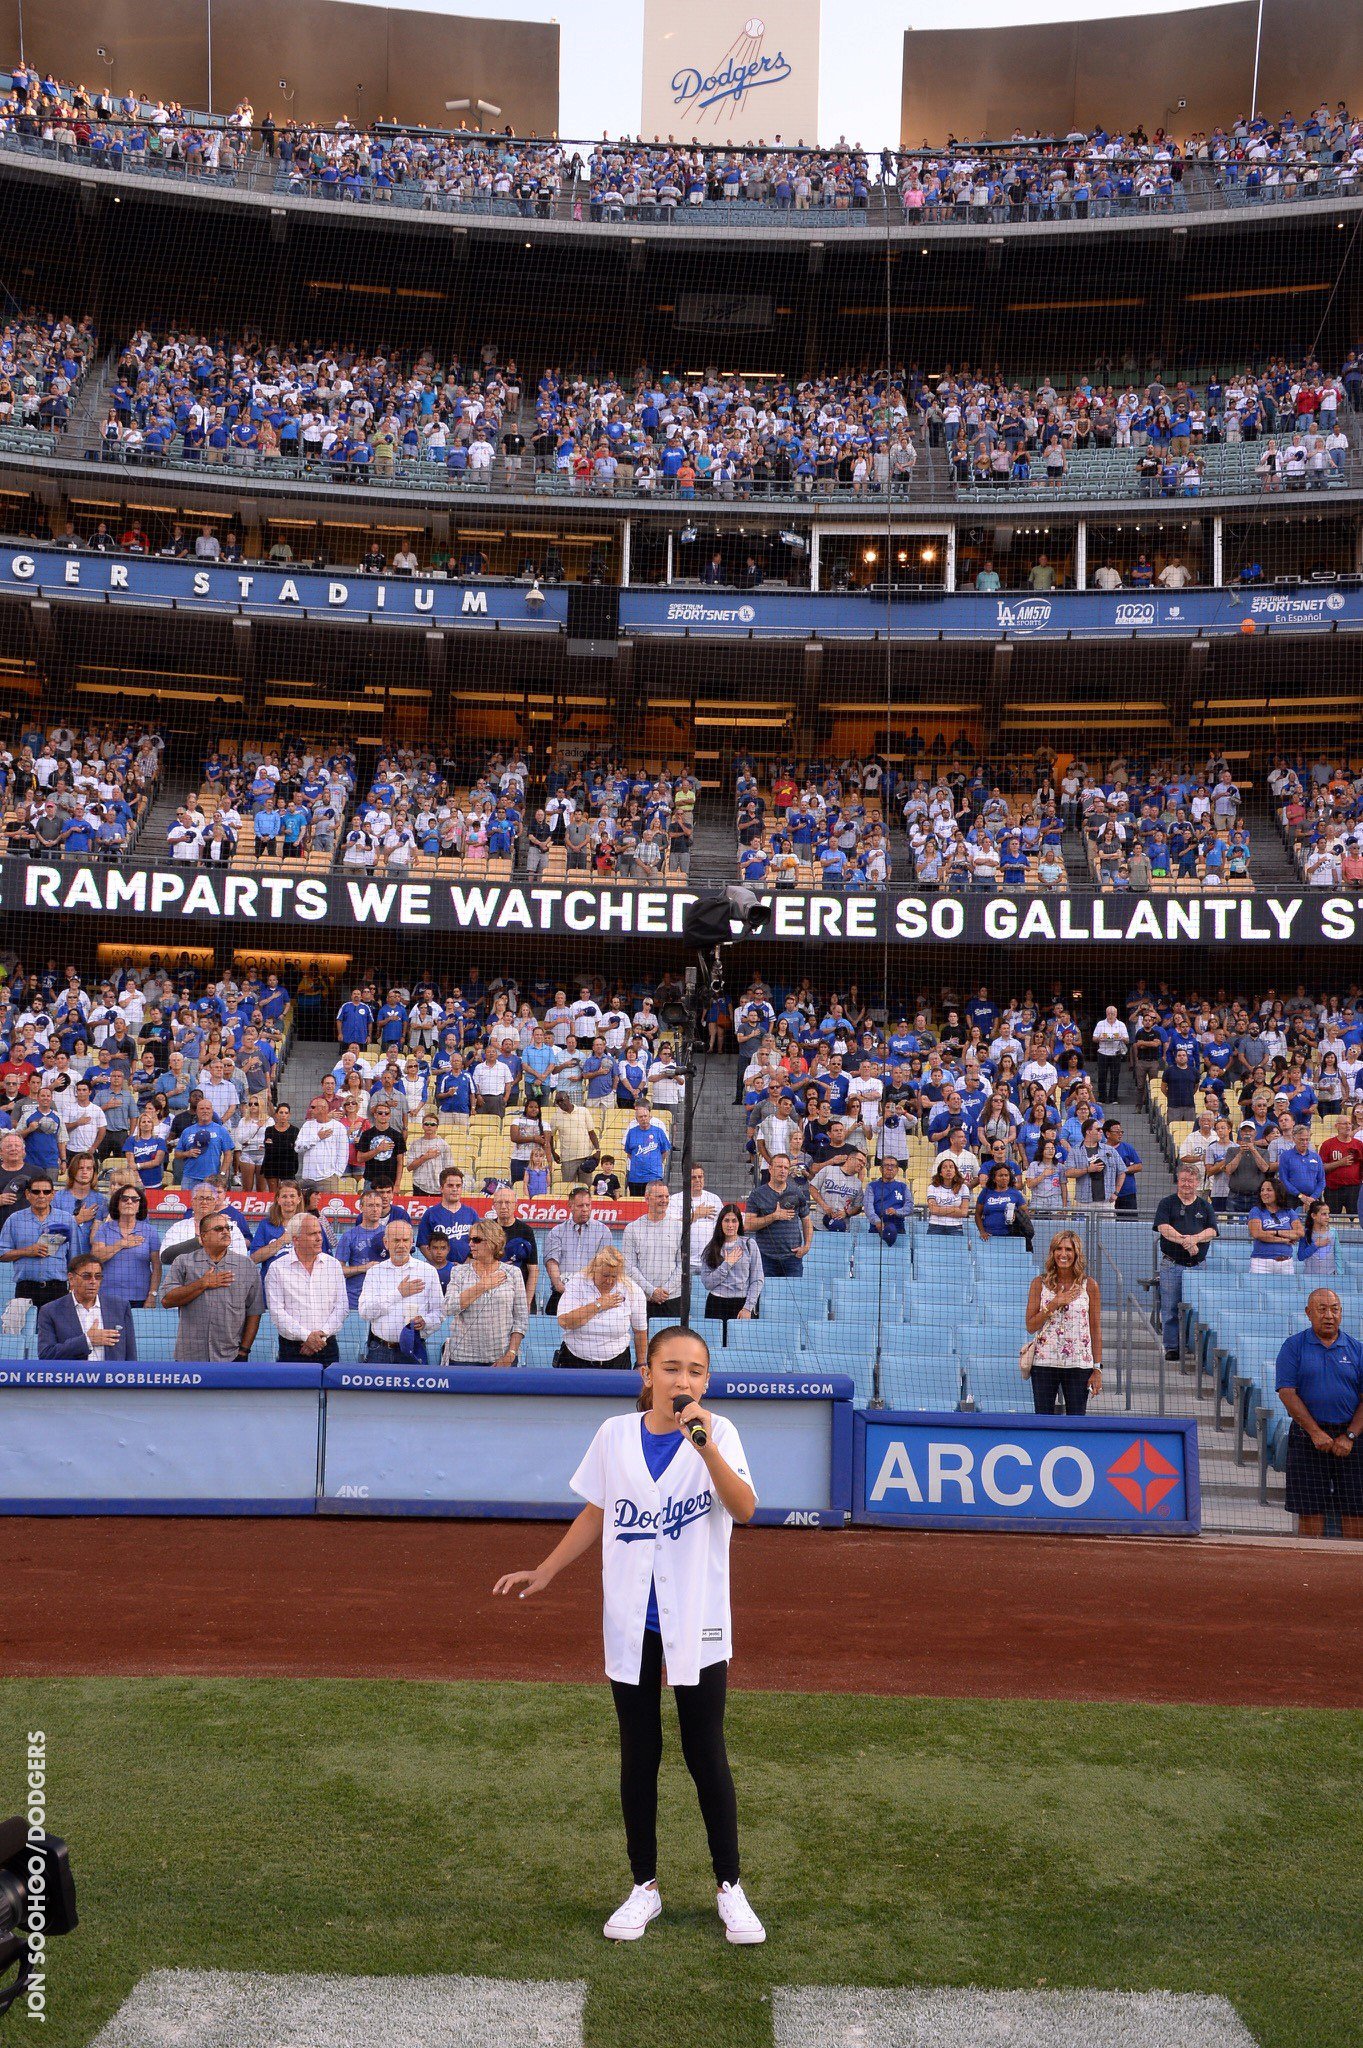 Los Angeles Dodgers on X: Emme and her dad. 💙 It's Dave Roberts  Bobblehead Night presented by Mastercard!  / X